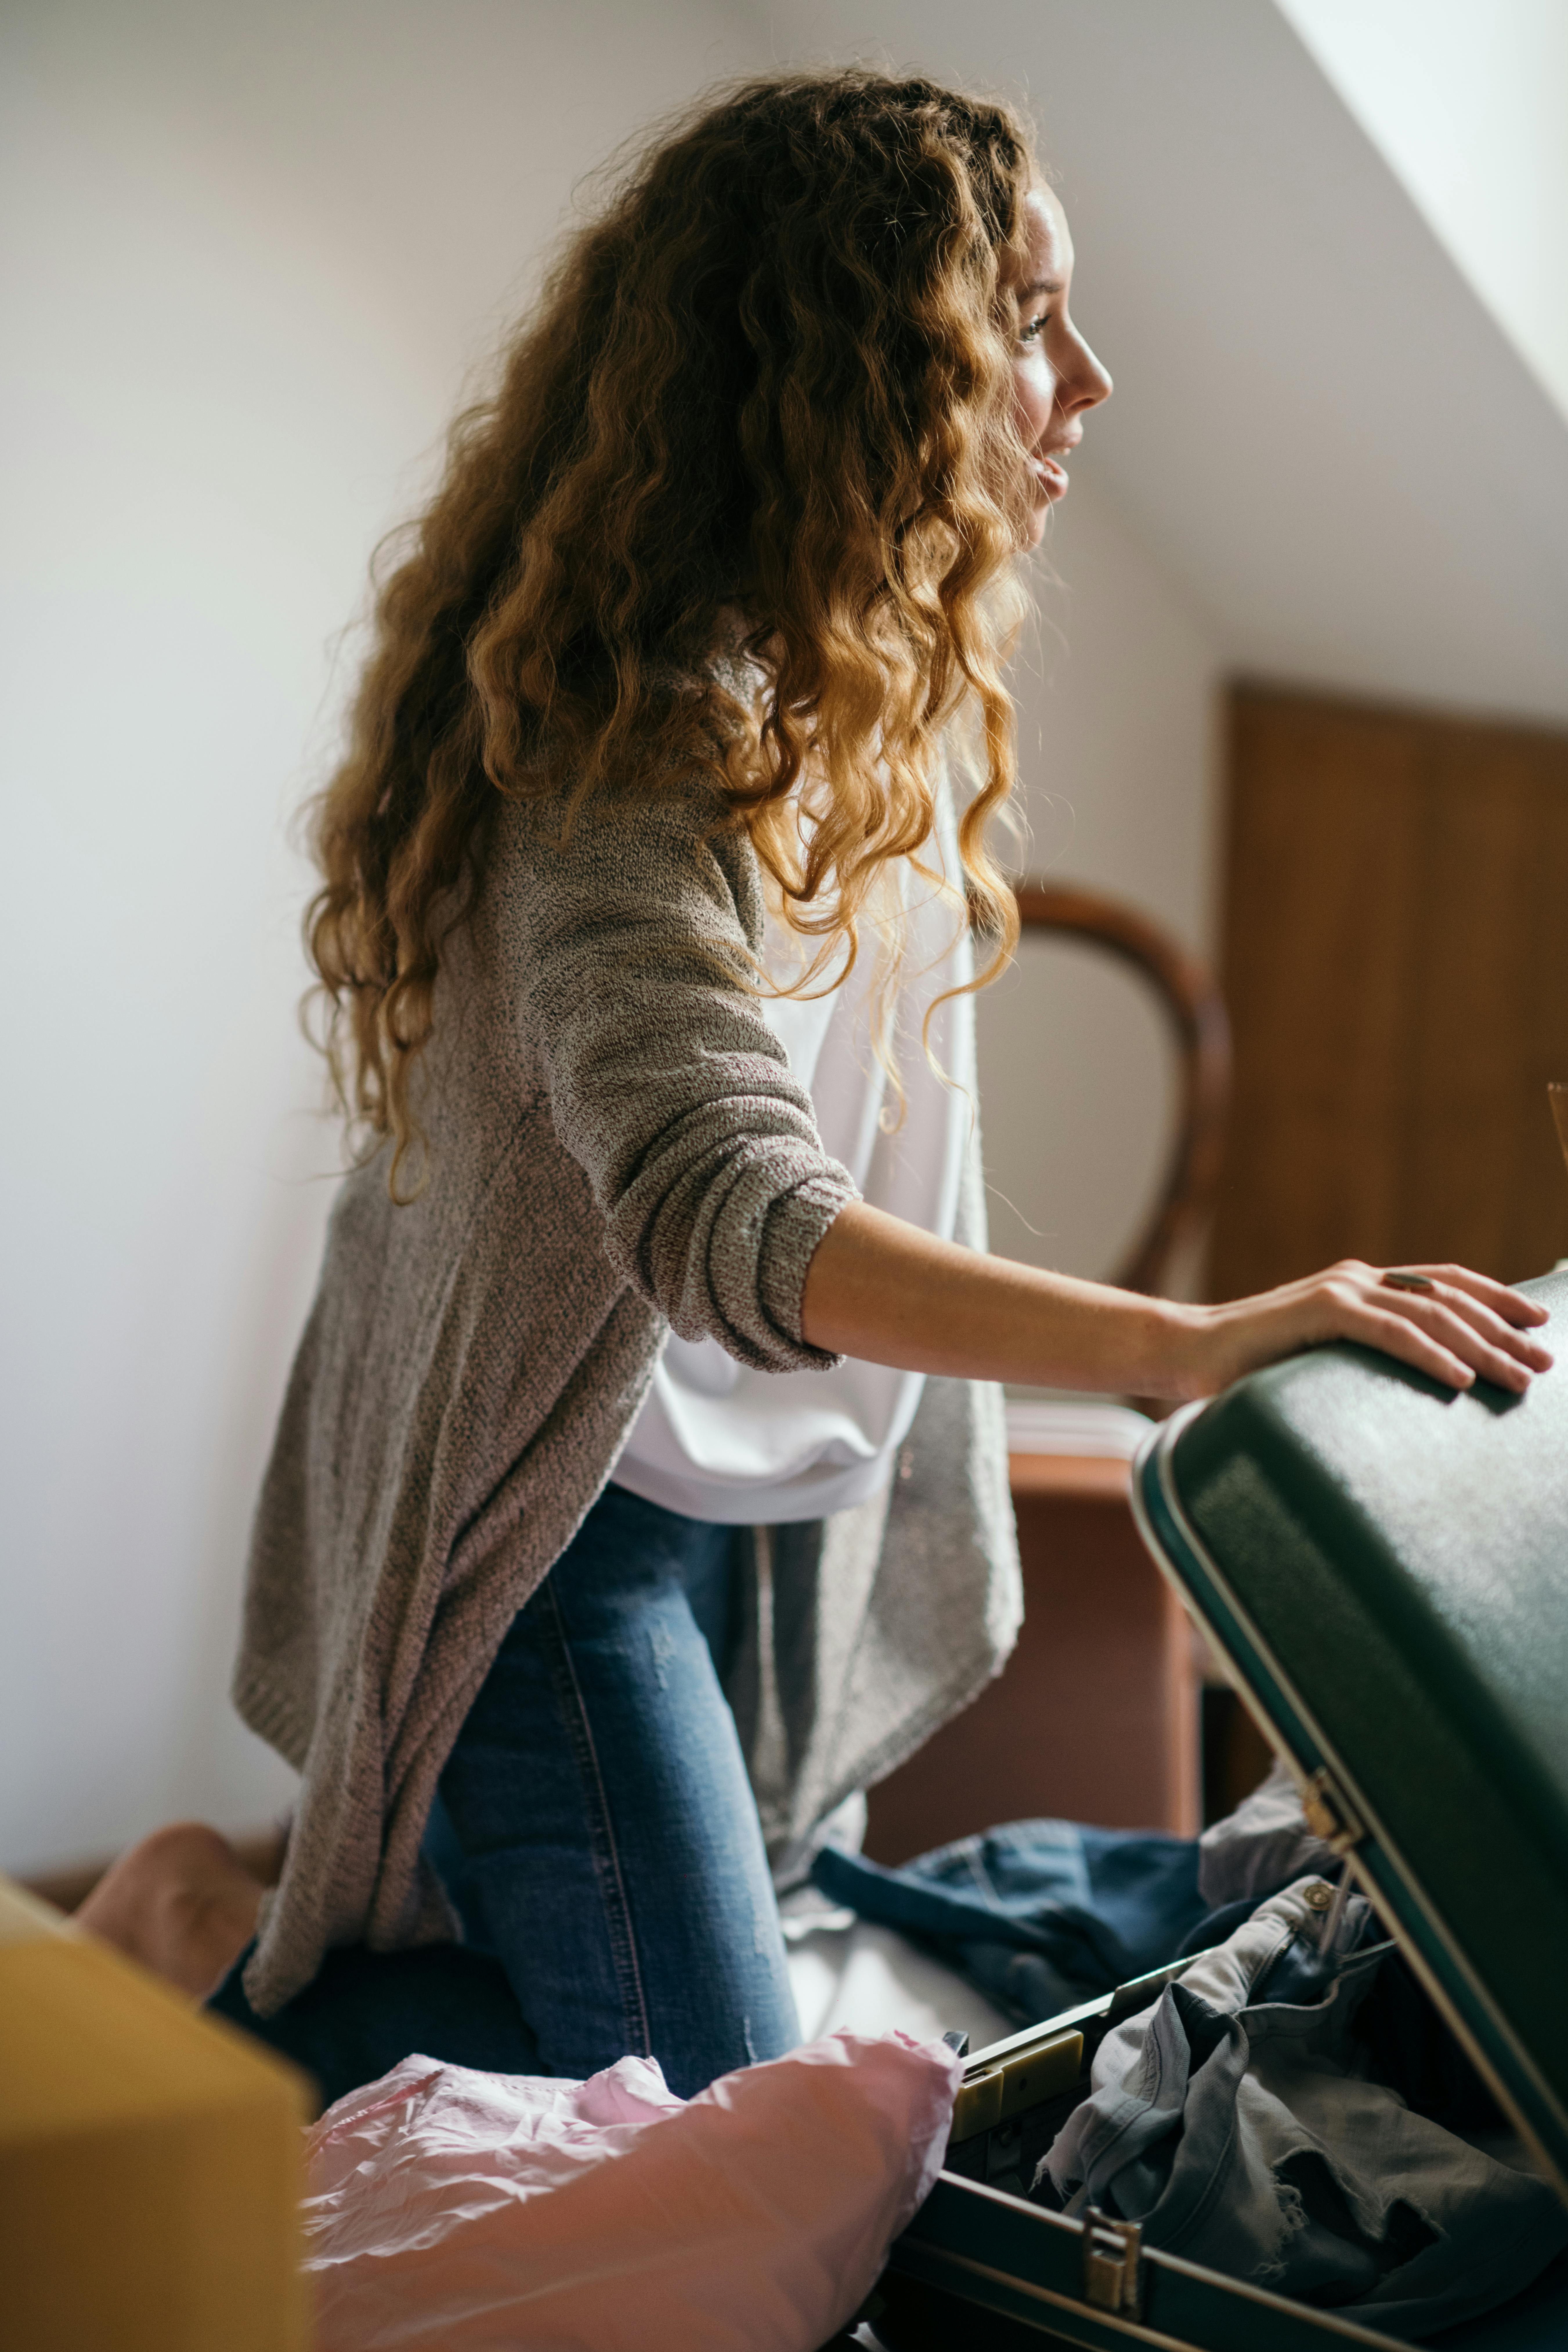 A young woman packing her bags | Source: Pexels